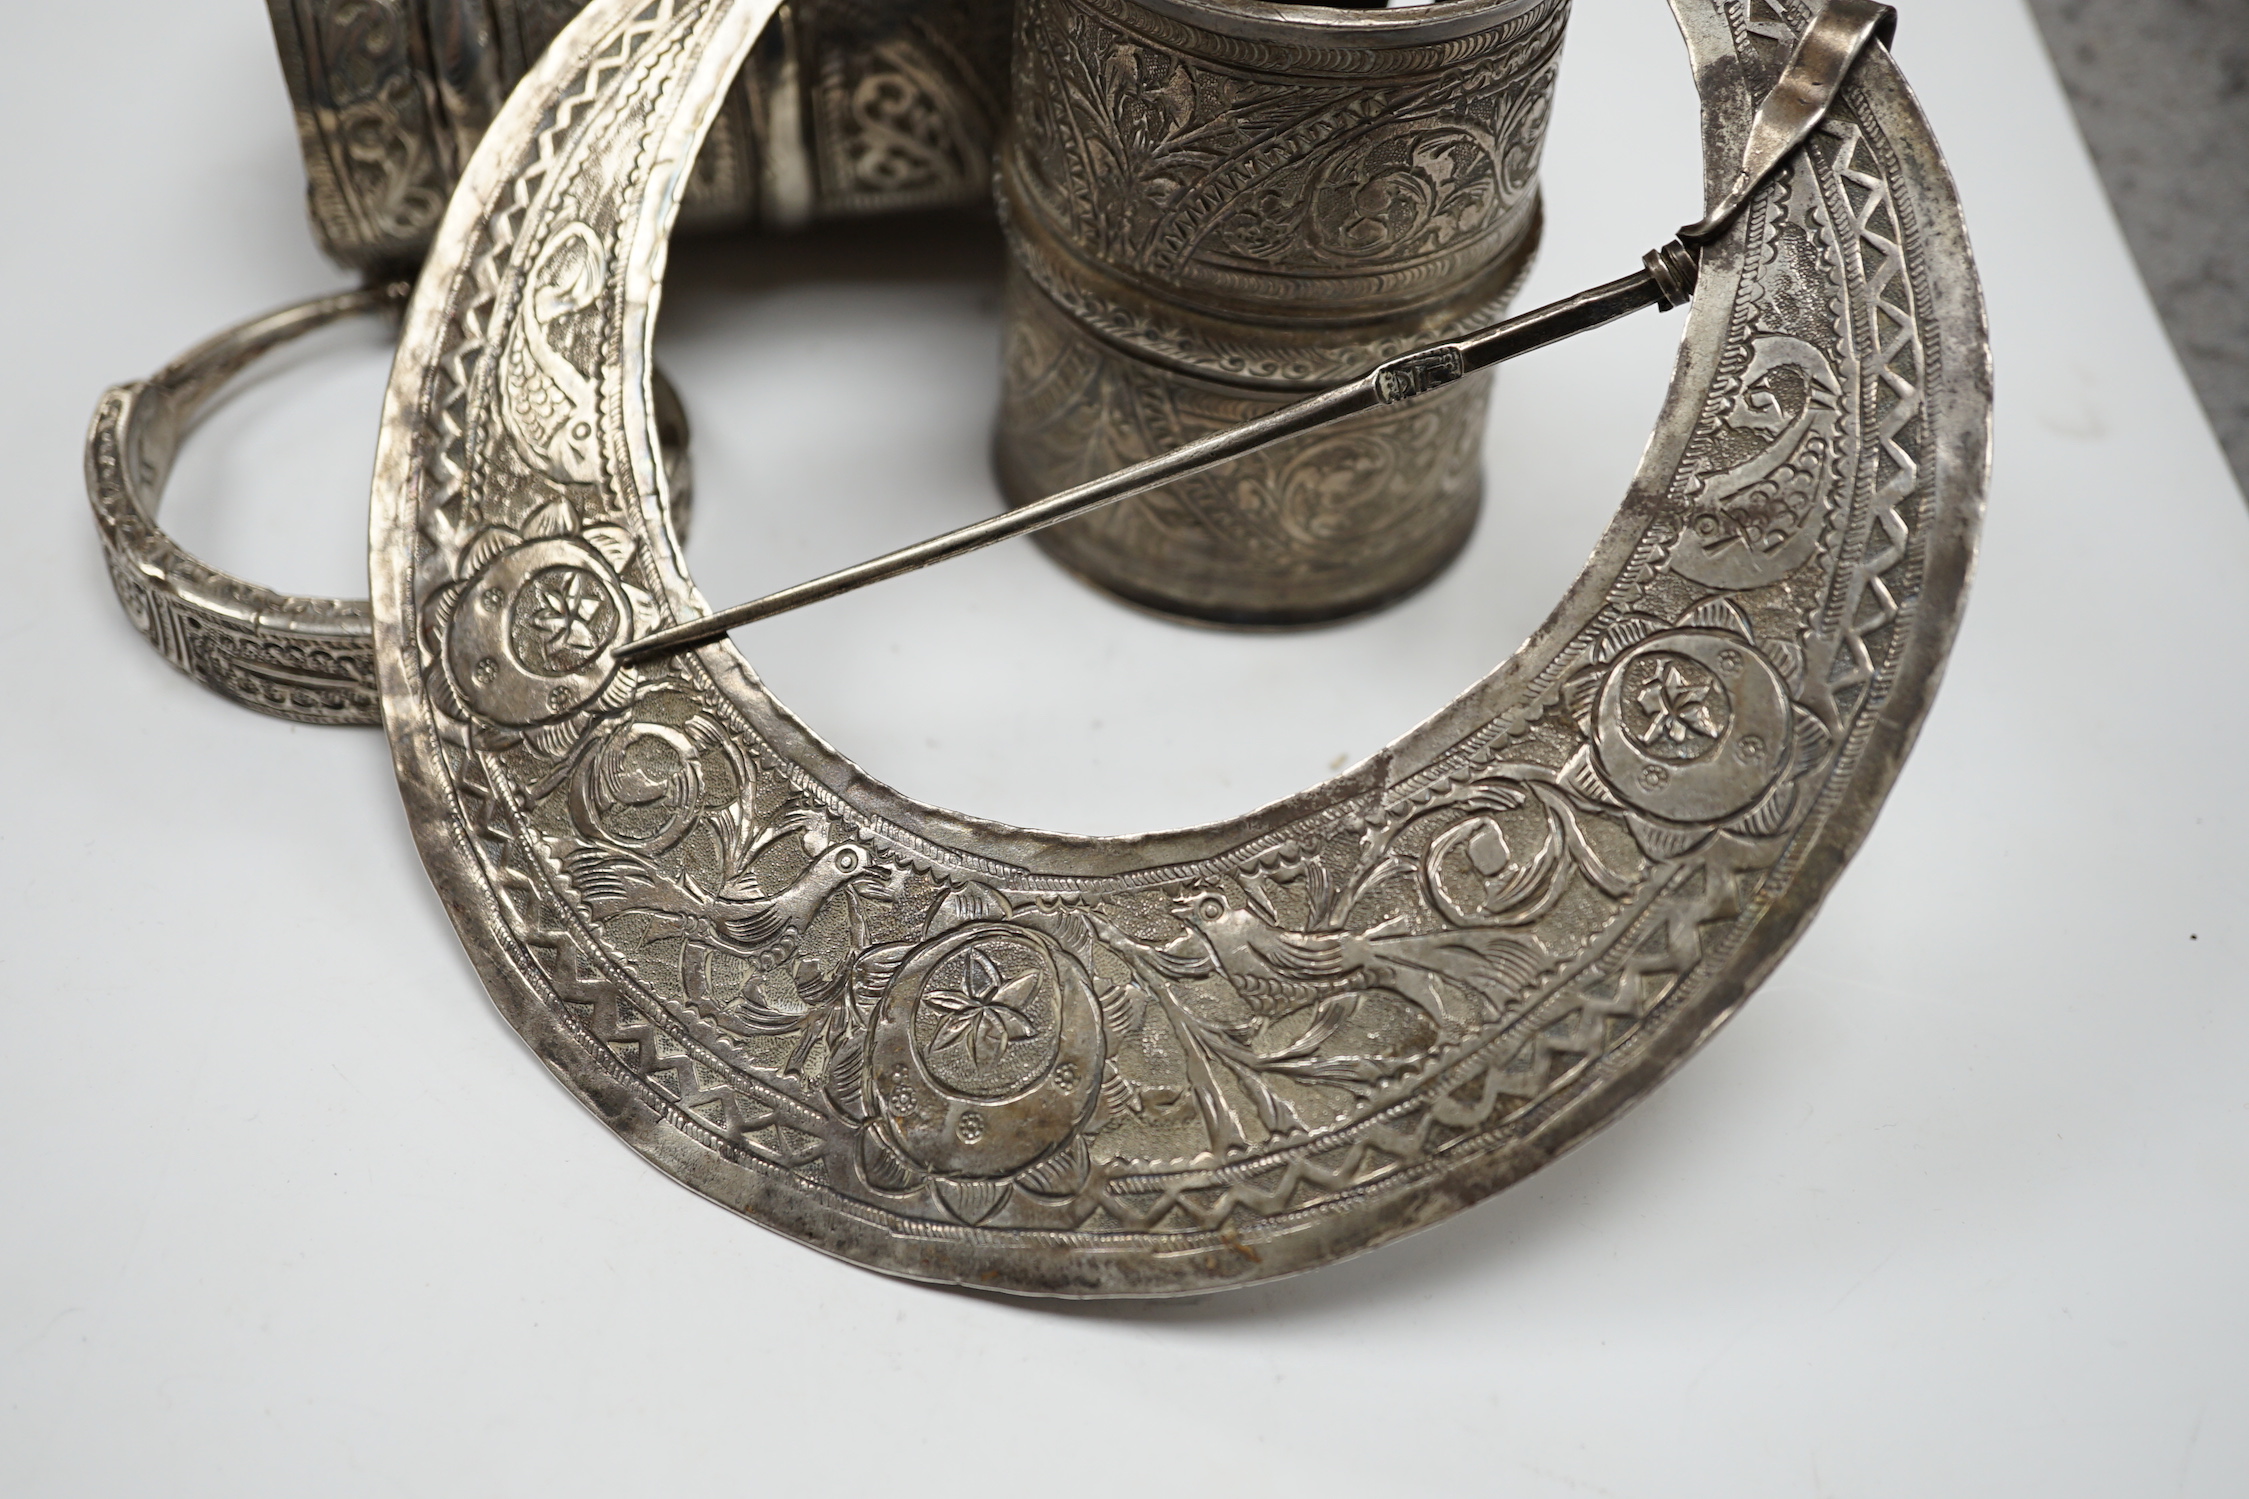 A collection of eight North African Berber white metal jewellery, etc, including bangles, cuffs and hair ornament.